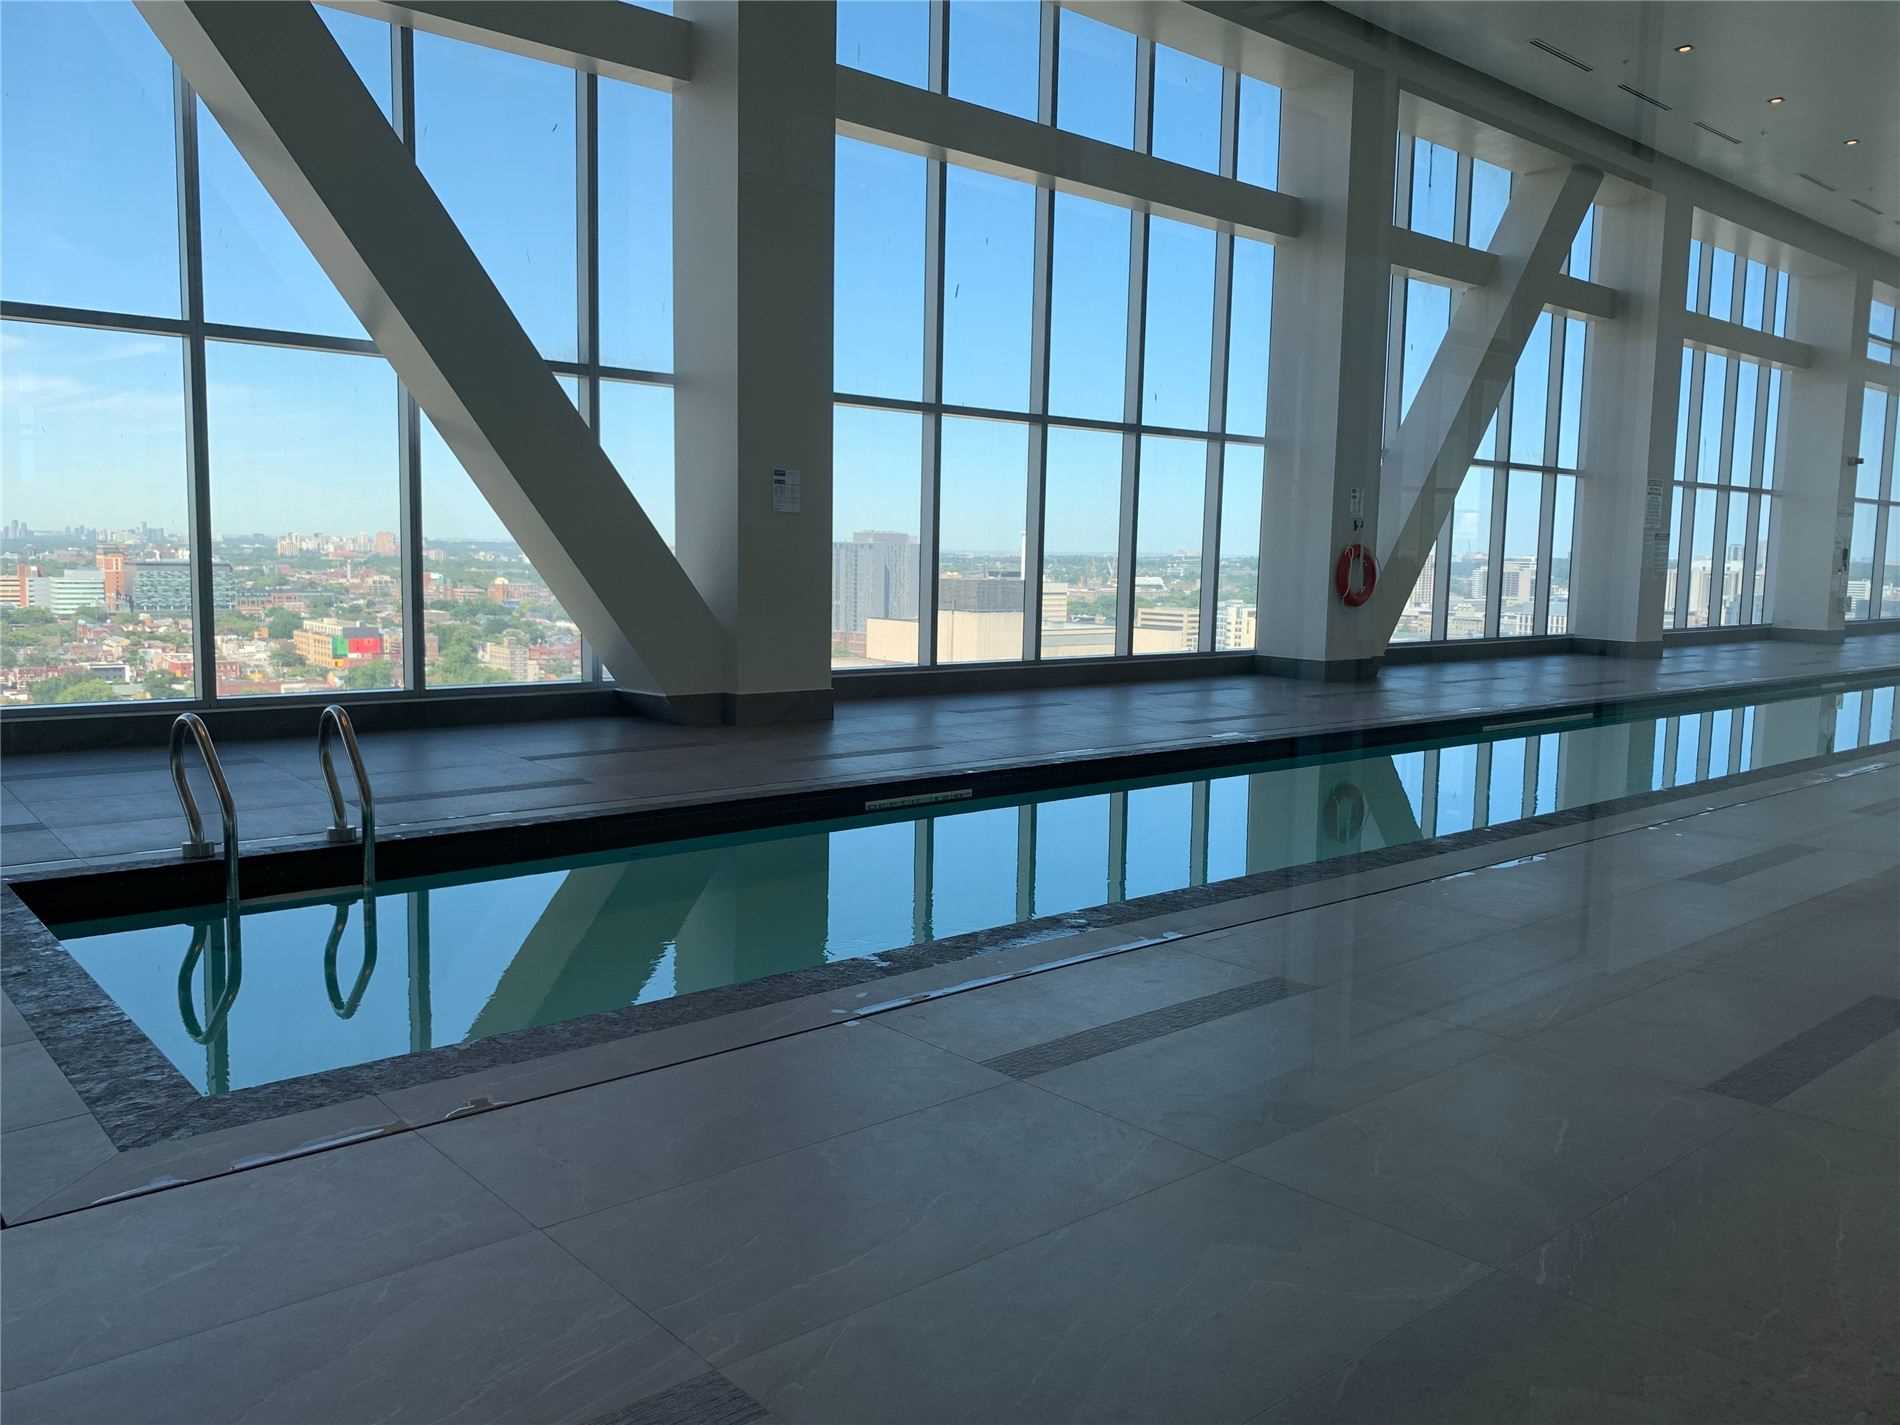 Long swimming pool at The Residences of 488 University Avenue.